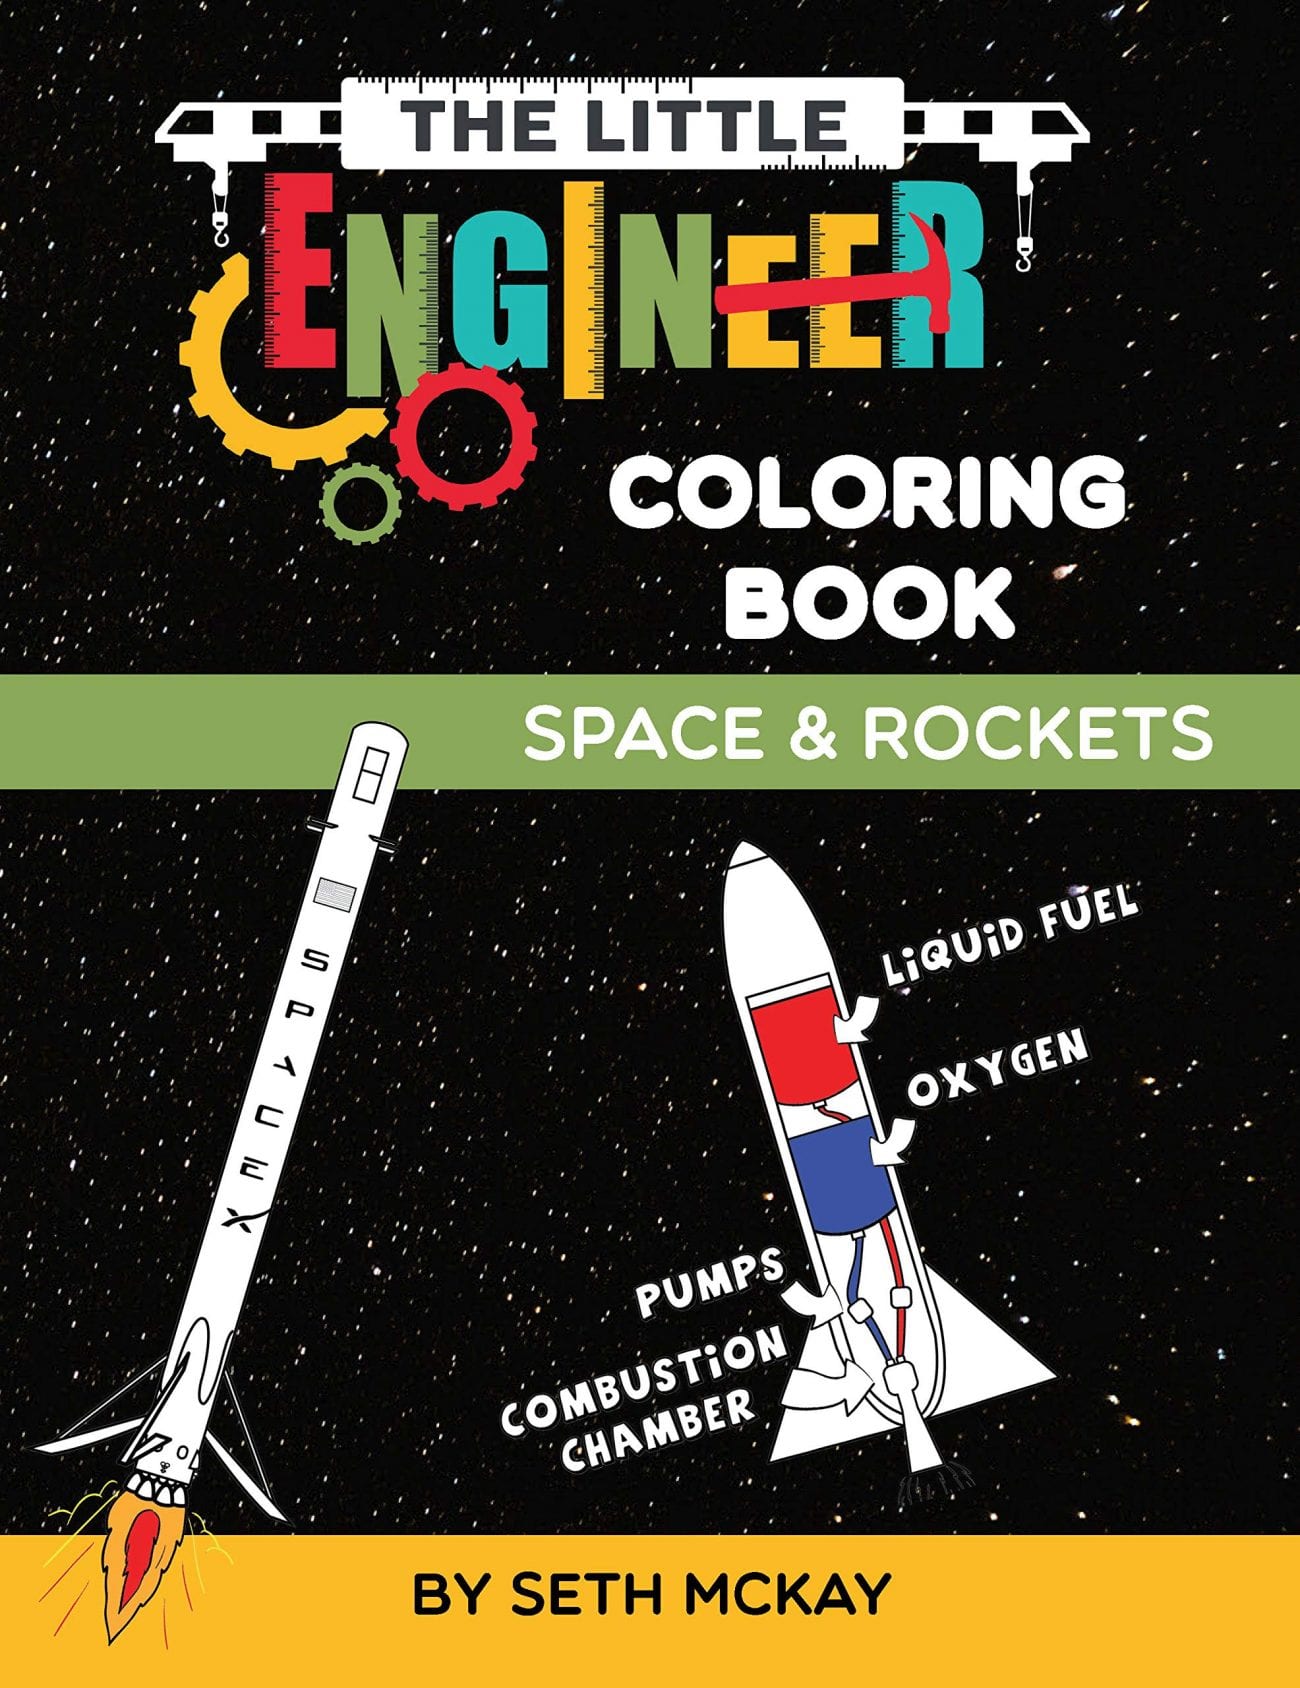 Best Educational Coloring Books, as Chosen by Teachers